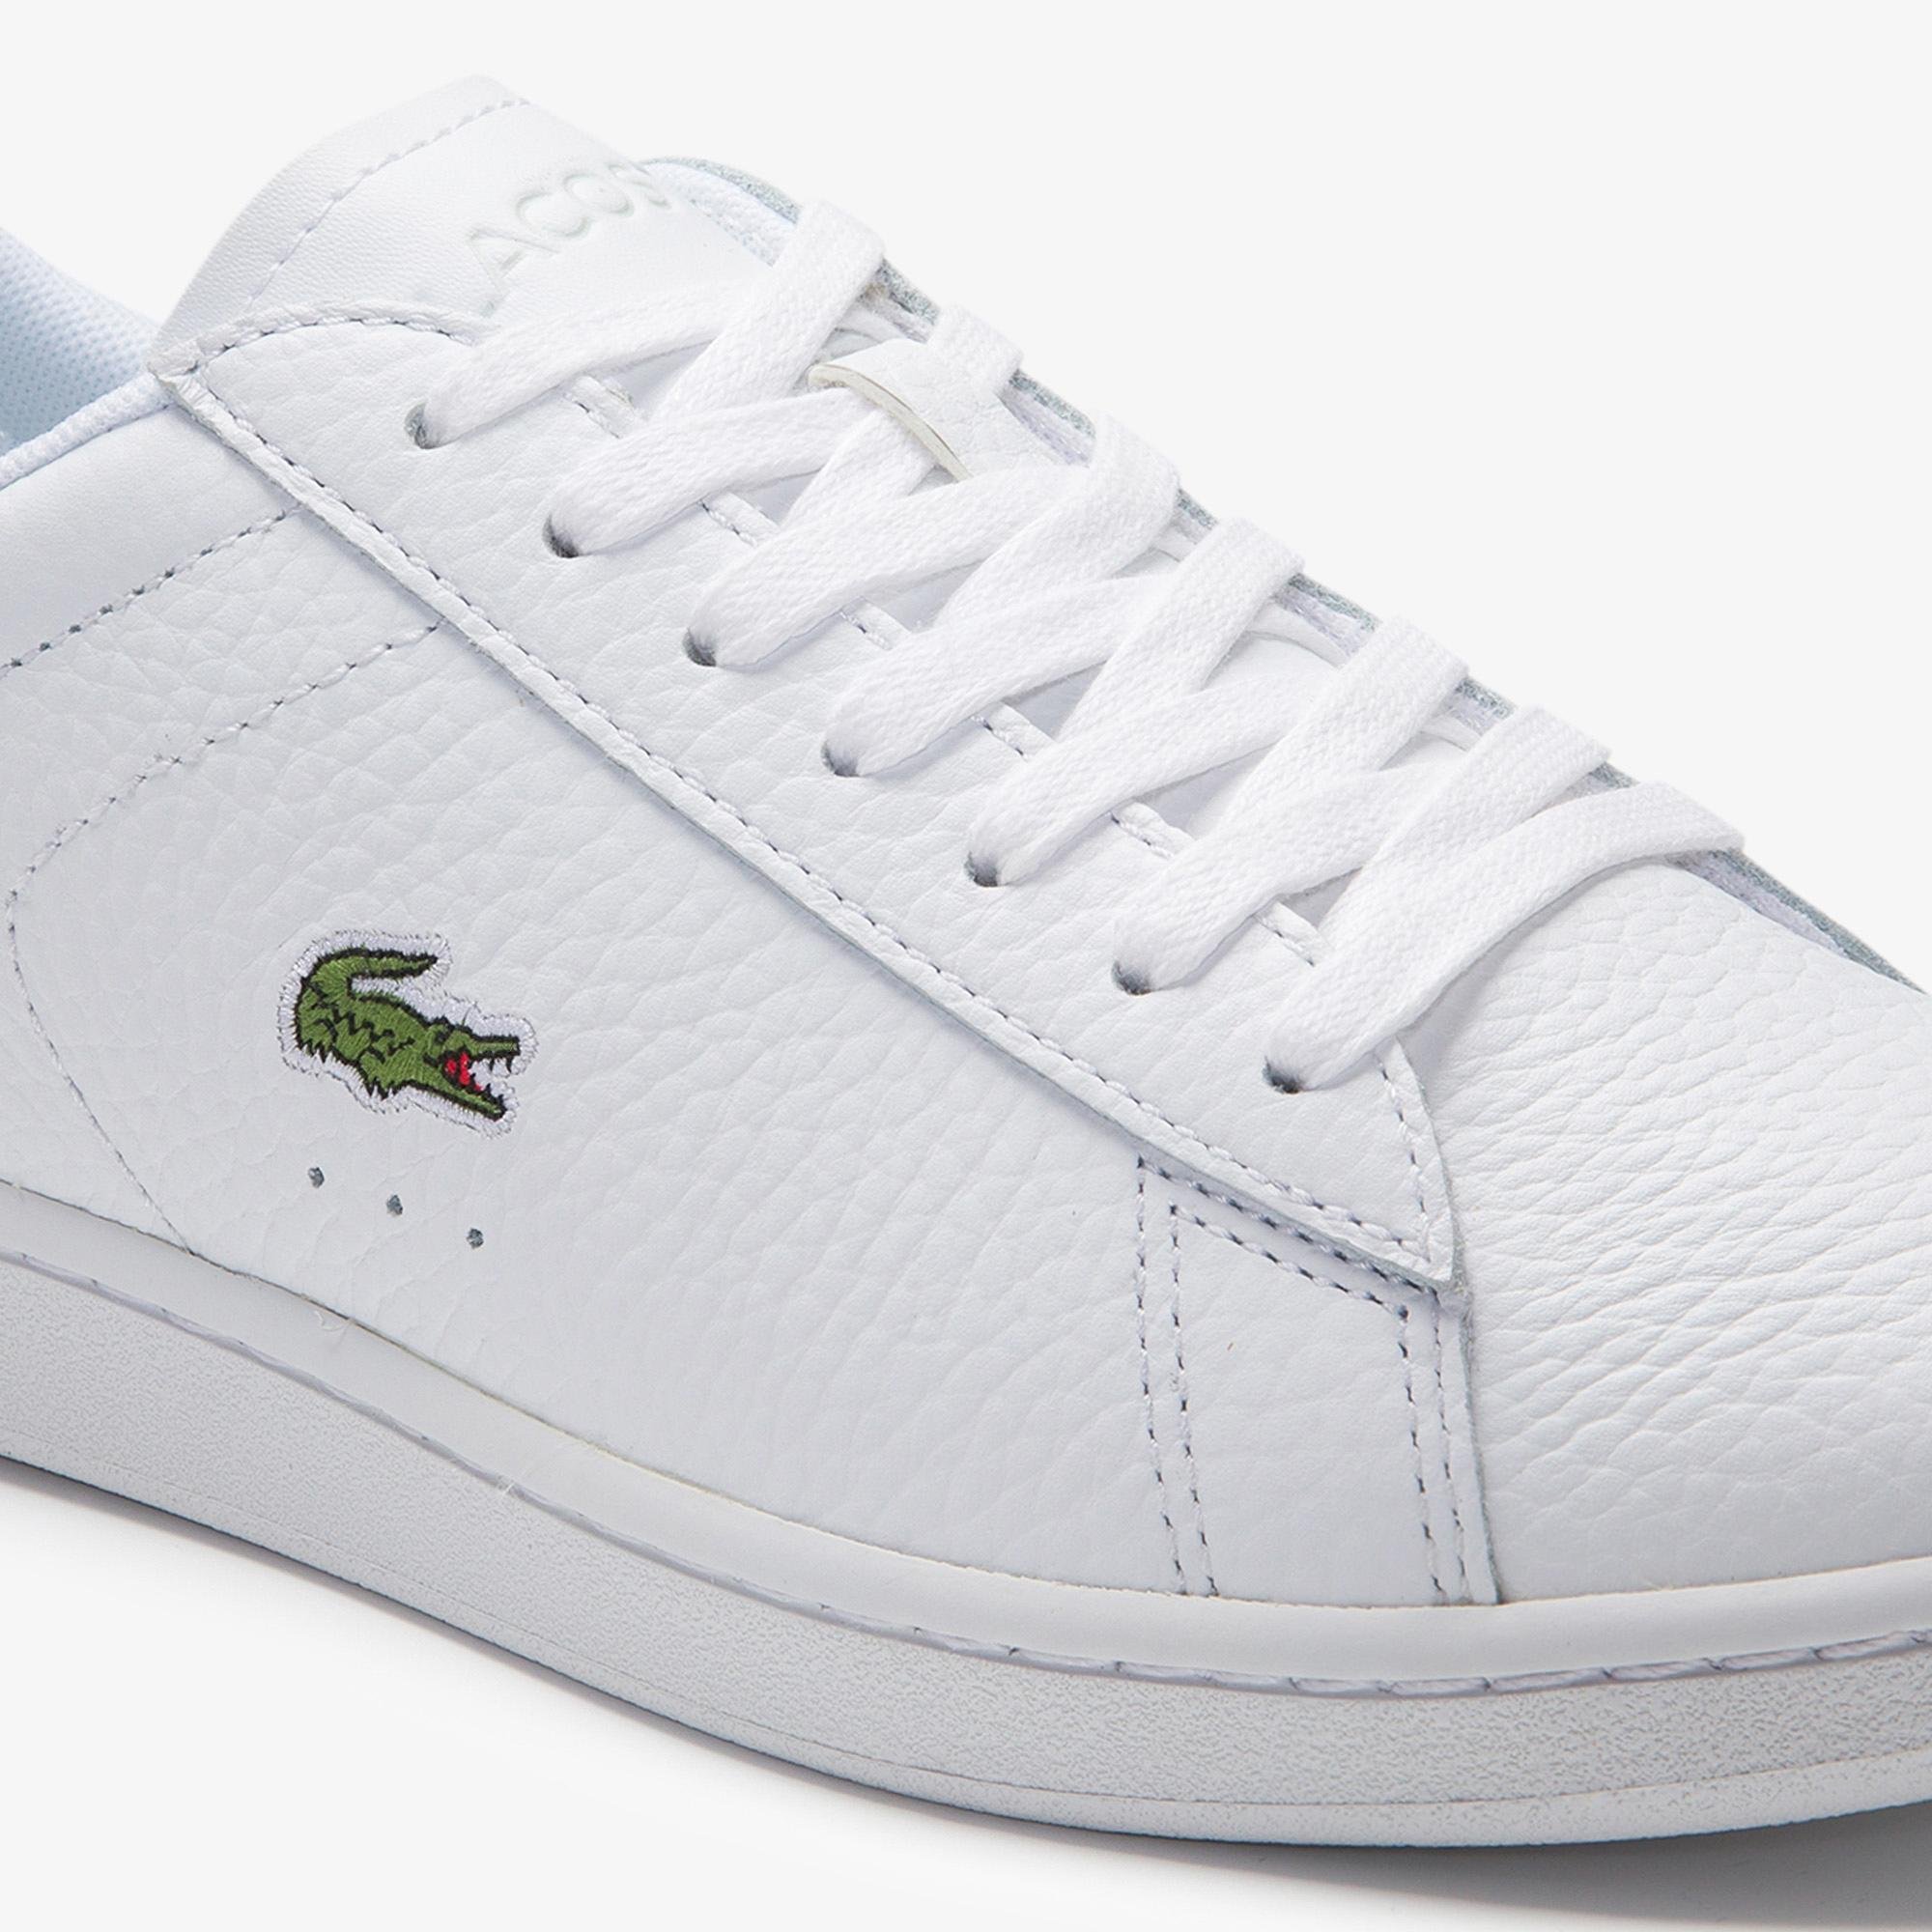 Lacoste Women's Carnaby Evo Layered Leather Sneakers